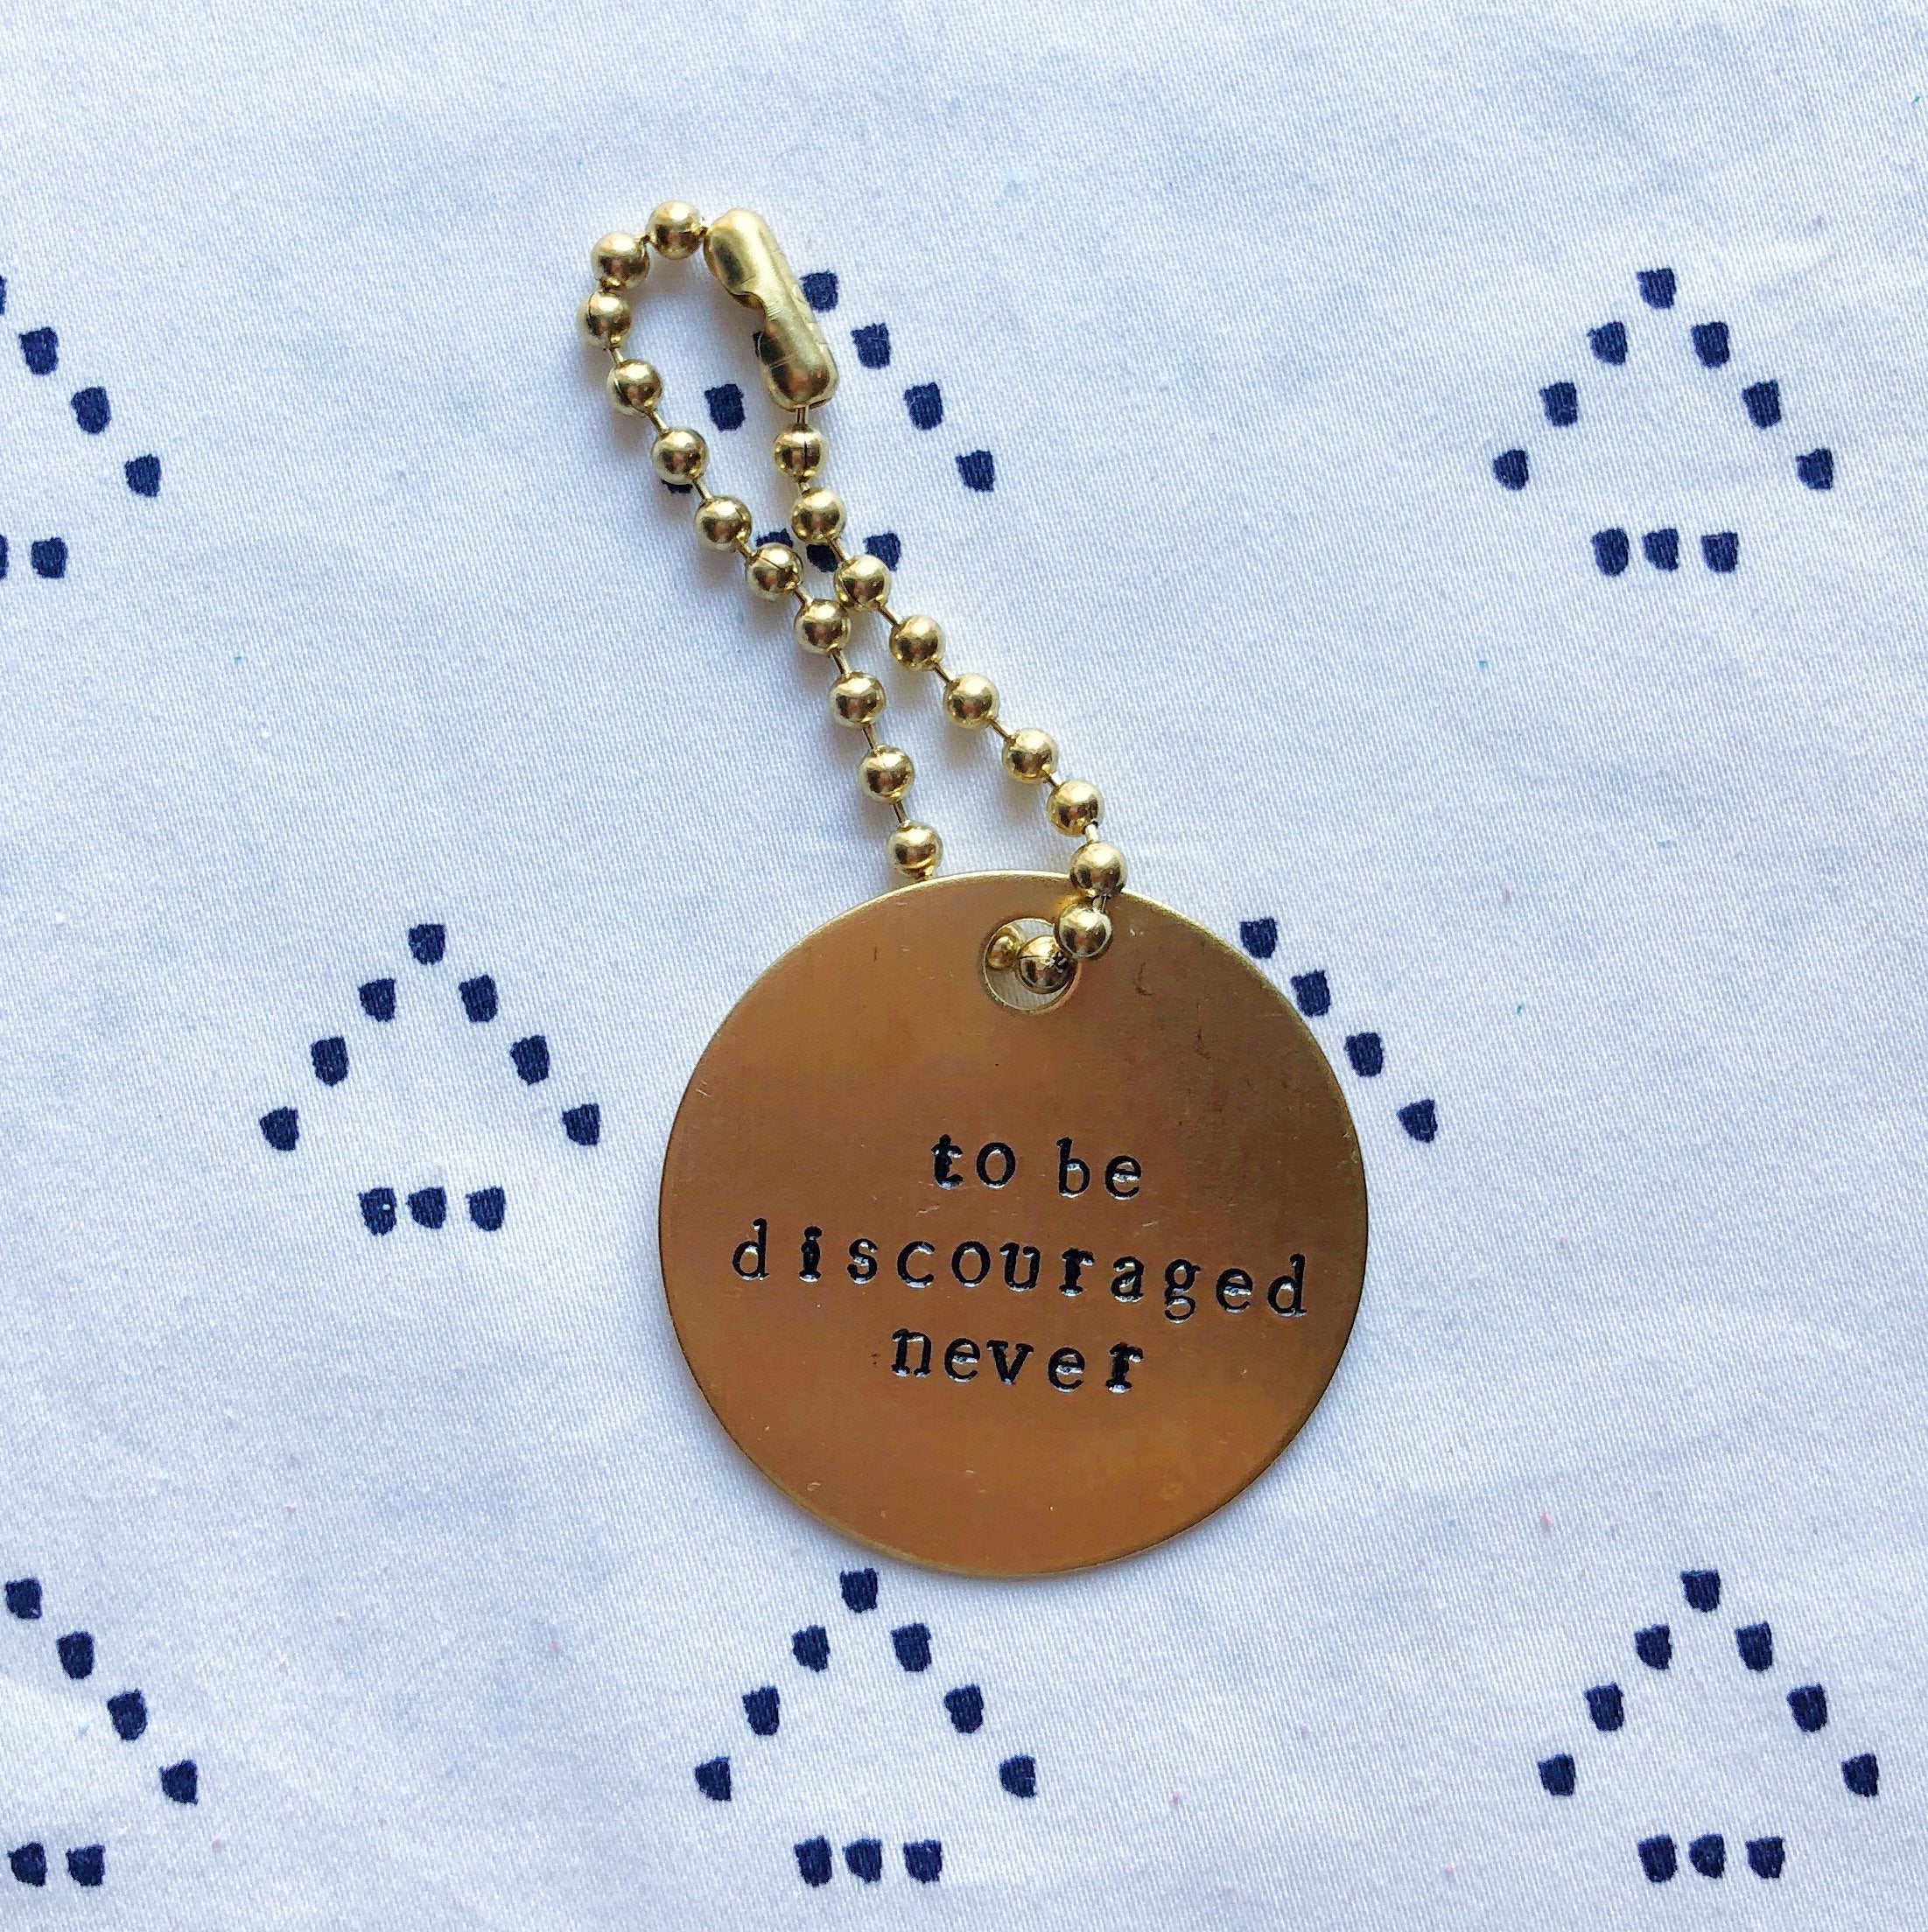 Sorority Symphony "To Be Discouraged Never" Hand-Stamped Keychain